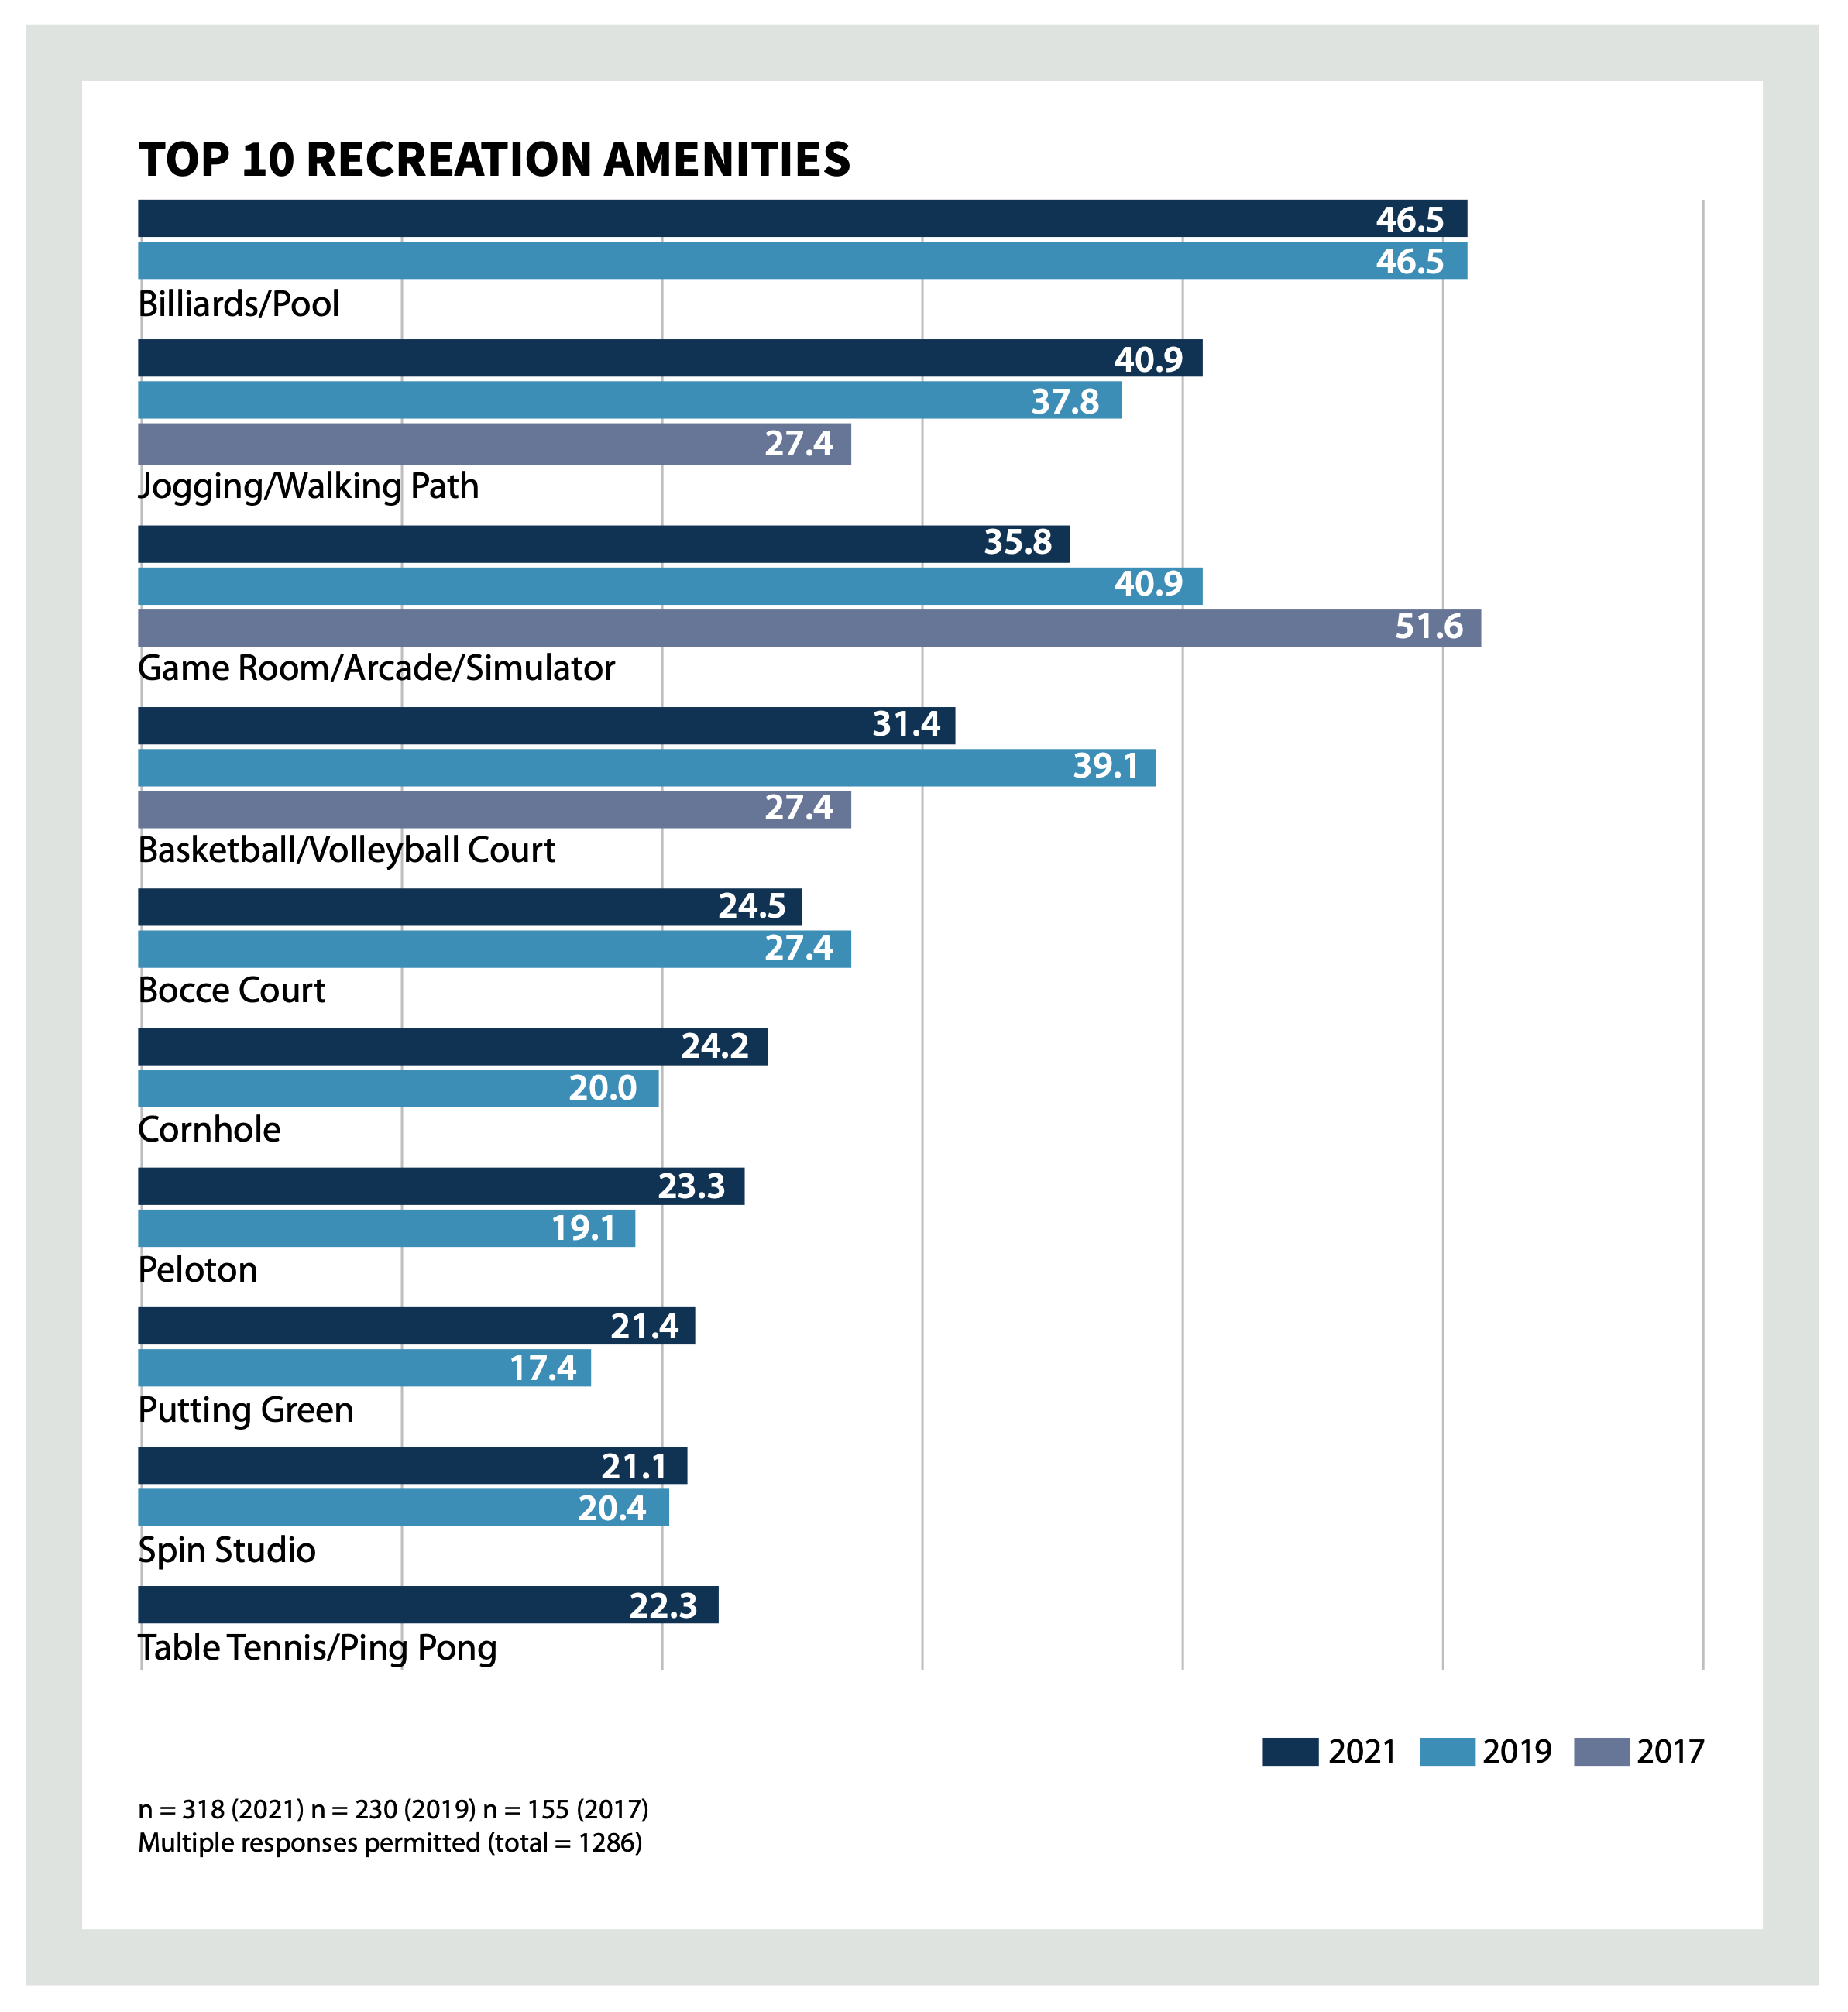 Top 10 Recreation Amenities at Multifamily Developments